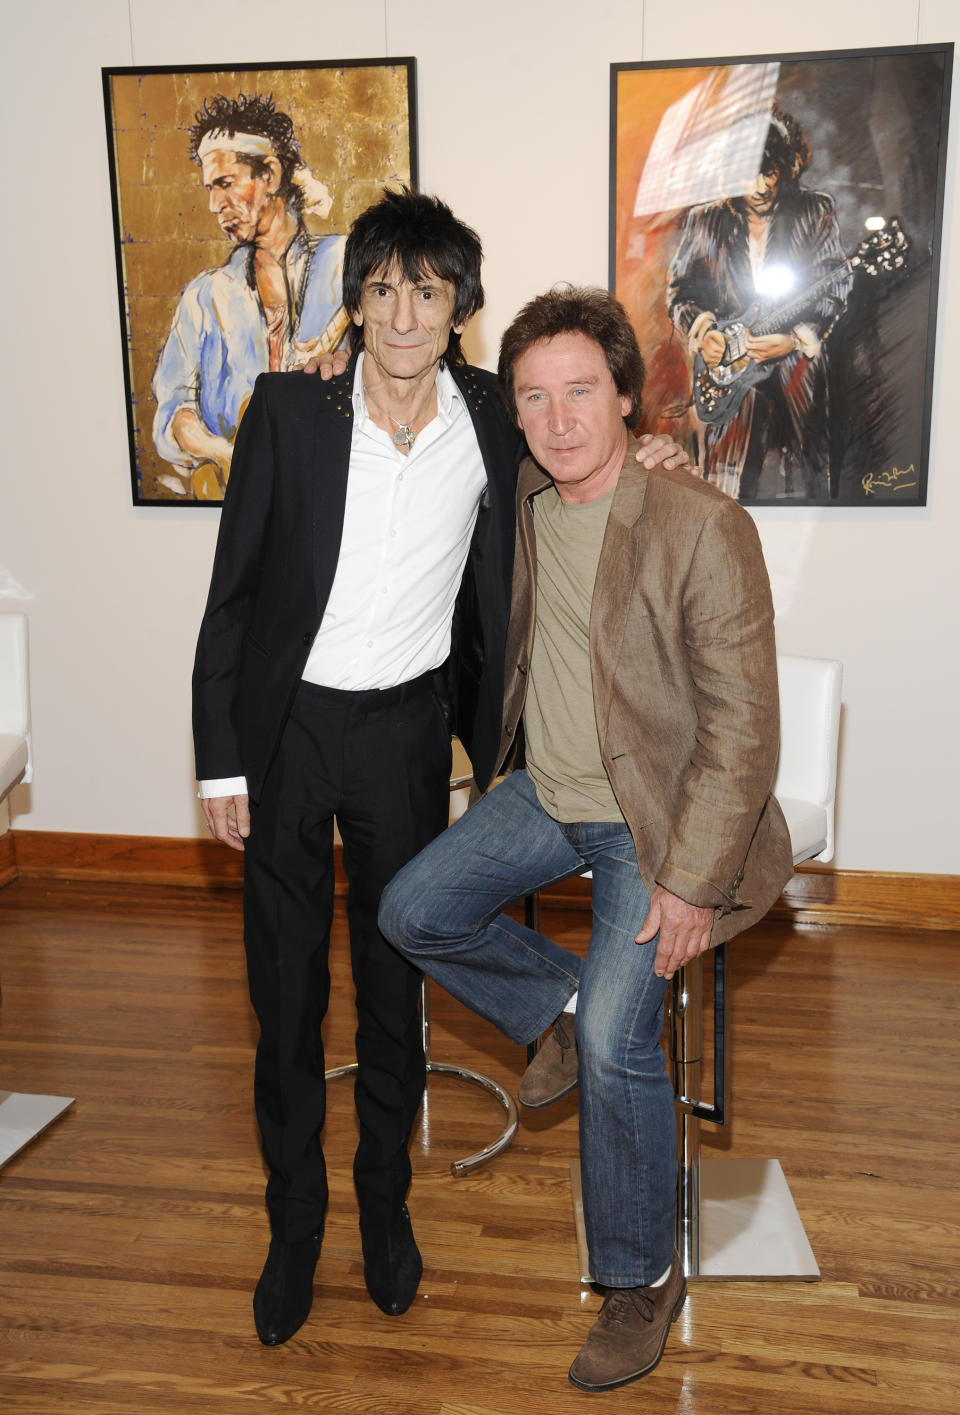 Rolling Stones guitarist Ronnie Wood and drummer Kenney Jones pose for a photo during a news conference unveiling Wood's new art exhibit "Faces, Time and Places" on Monday, April 9, 2012, in New York. (AP Photo/Evan Agostini)